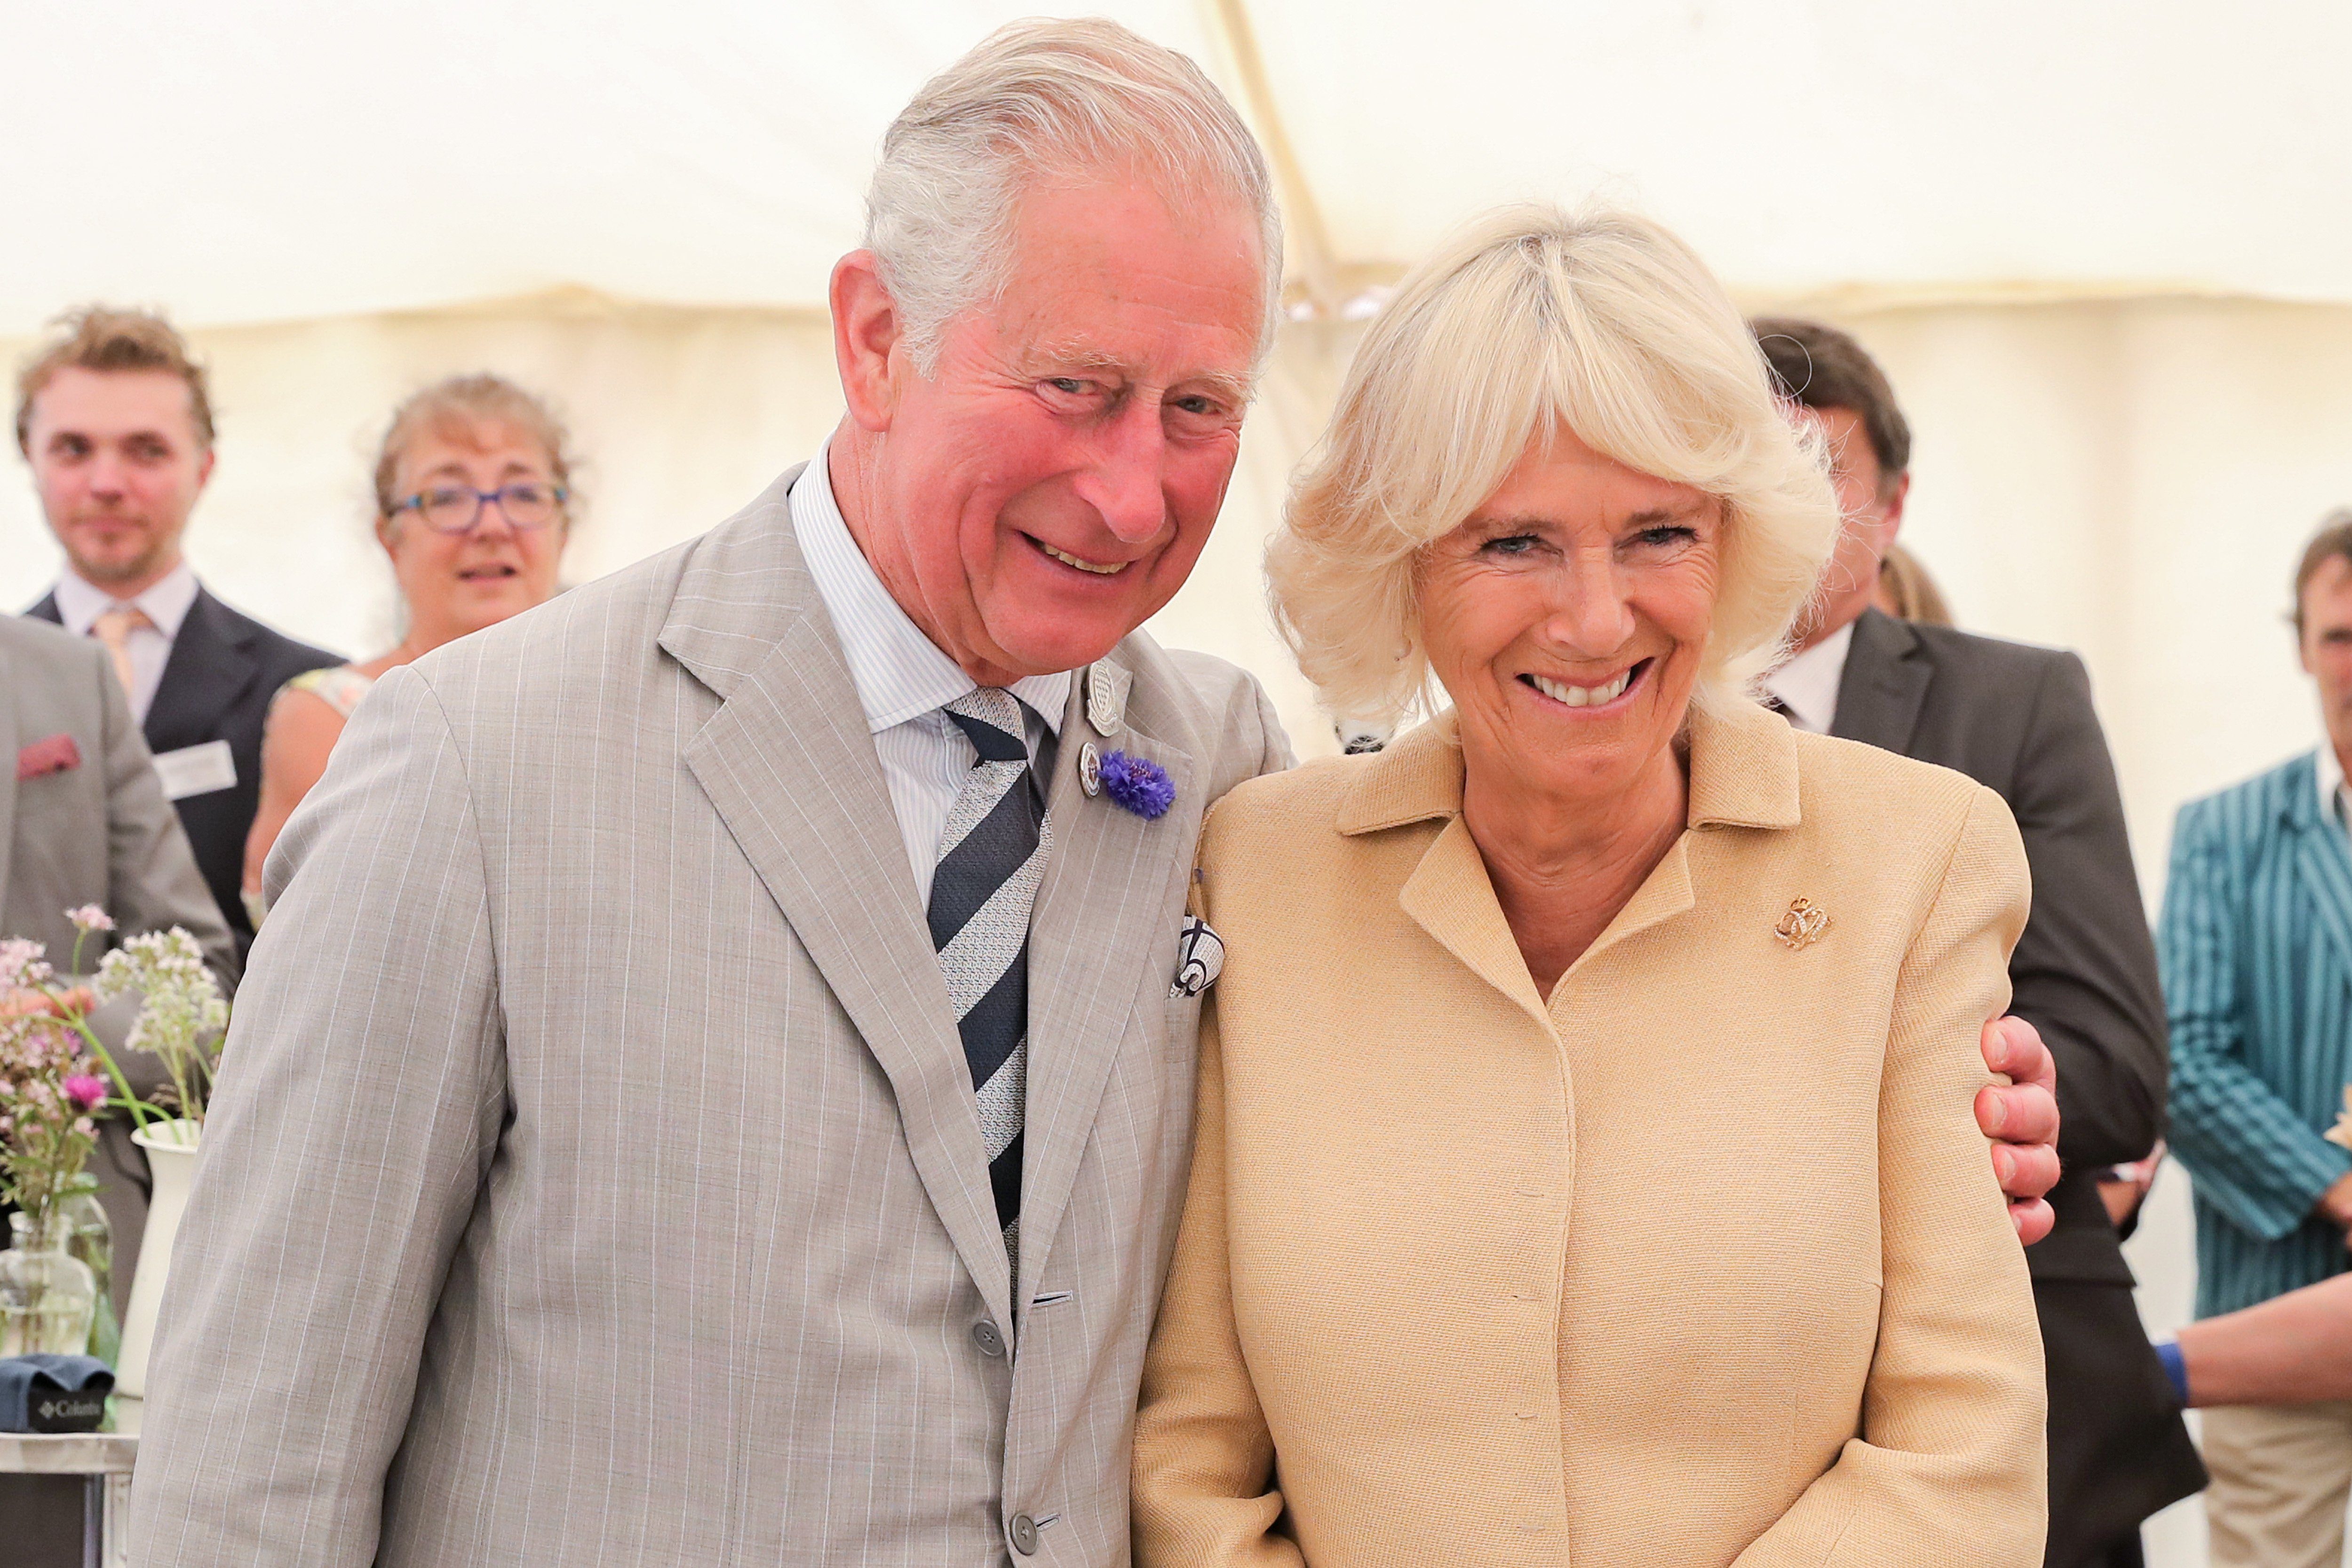 Mandatory Credit: Photo by Shutterstock (10340035bg) Camilla Duchess of Cornwall is sung Happy Birthday by Prince Charles and the crowds gathered at the National Parks Big Picnic celebration in honour of all 15 of the UKs National Parks, during an official visit to Simonsbath, England. Held in Exmoor National Park the picnic marks 70 years since they were created by the 1949 National Parks and Access to the Countryside Act. Royal visit to Somerset, UK - 17 Jul 2019